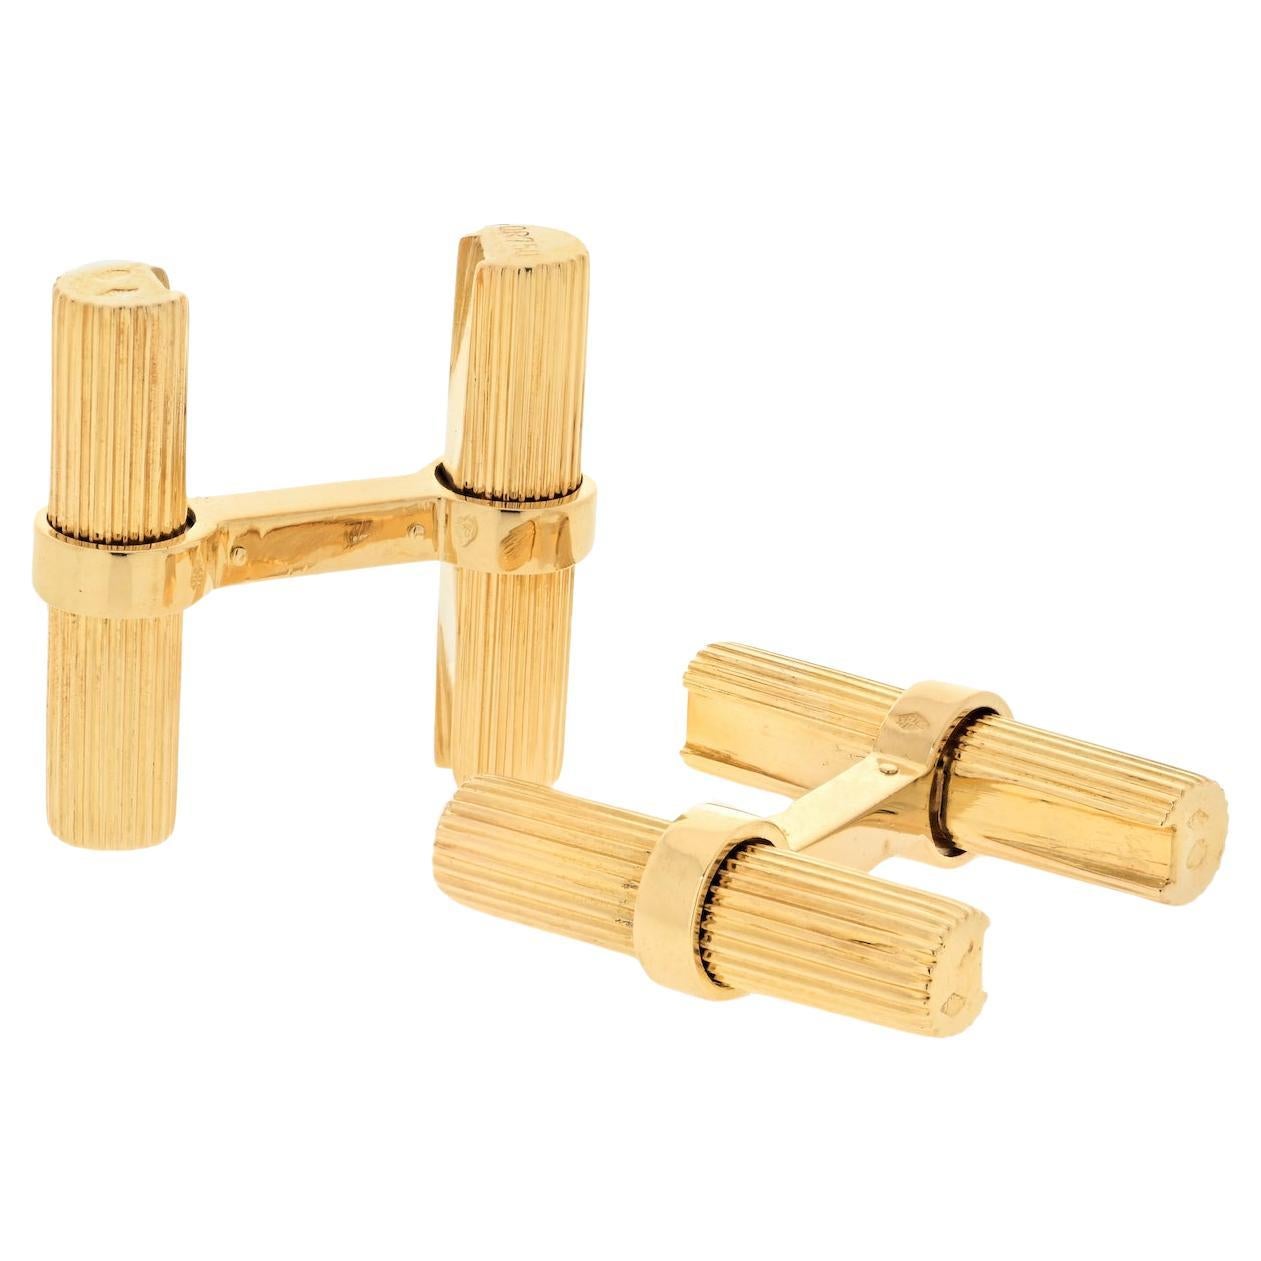 Exemplifying both elegance and versatility, these Cartier cufflinks are a masterpiece of design. Crafted in 18k yellow gold and hailing from the 1960s, they showcase a unique baton design that's perfect for daily wear. What truly sets these